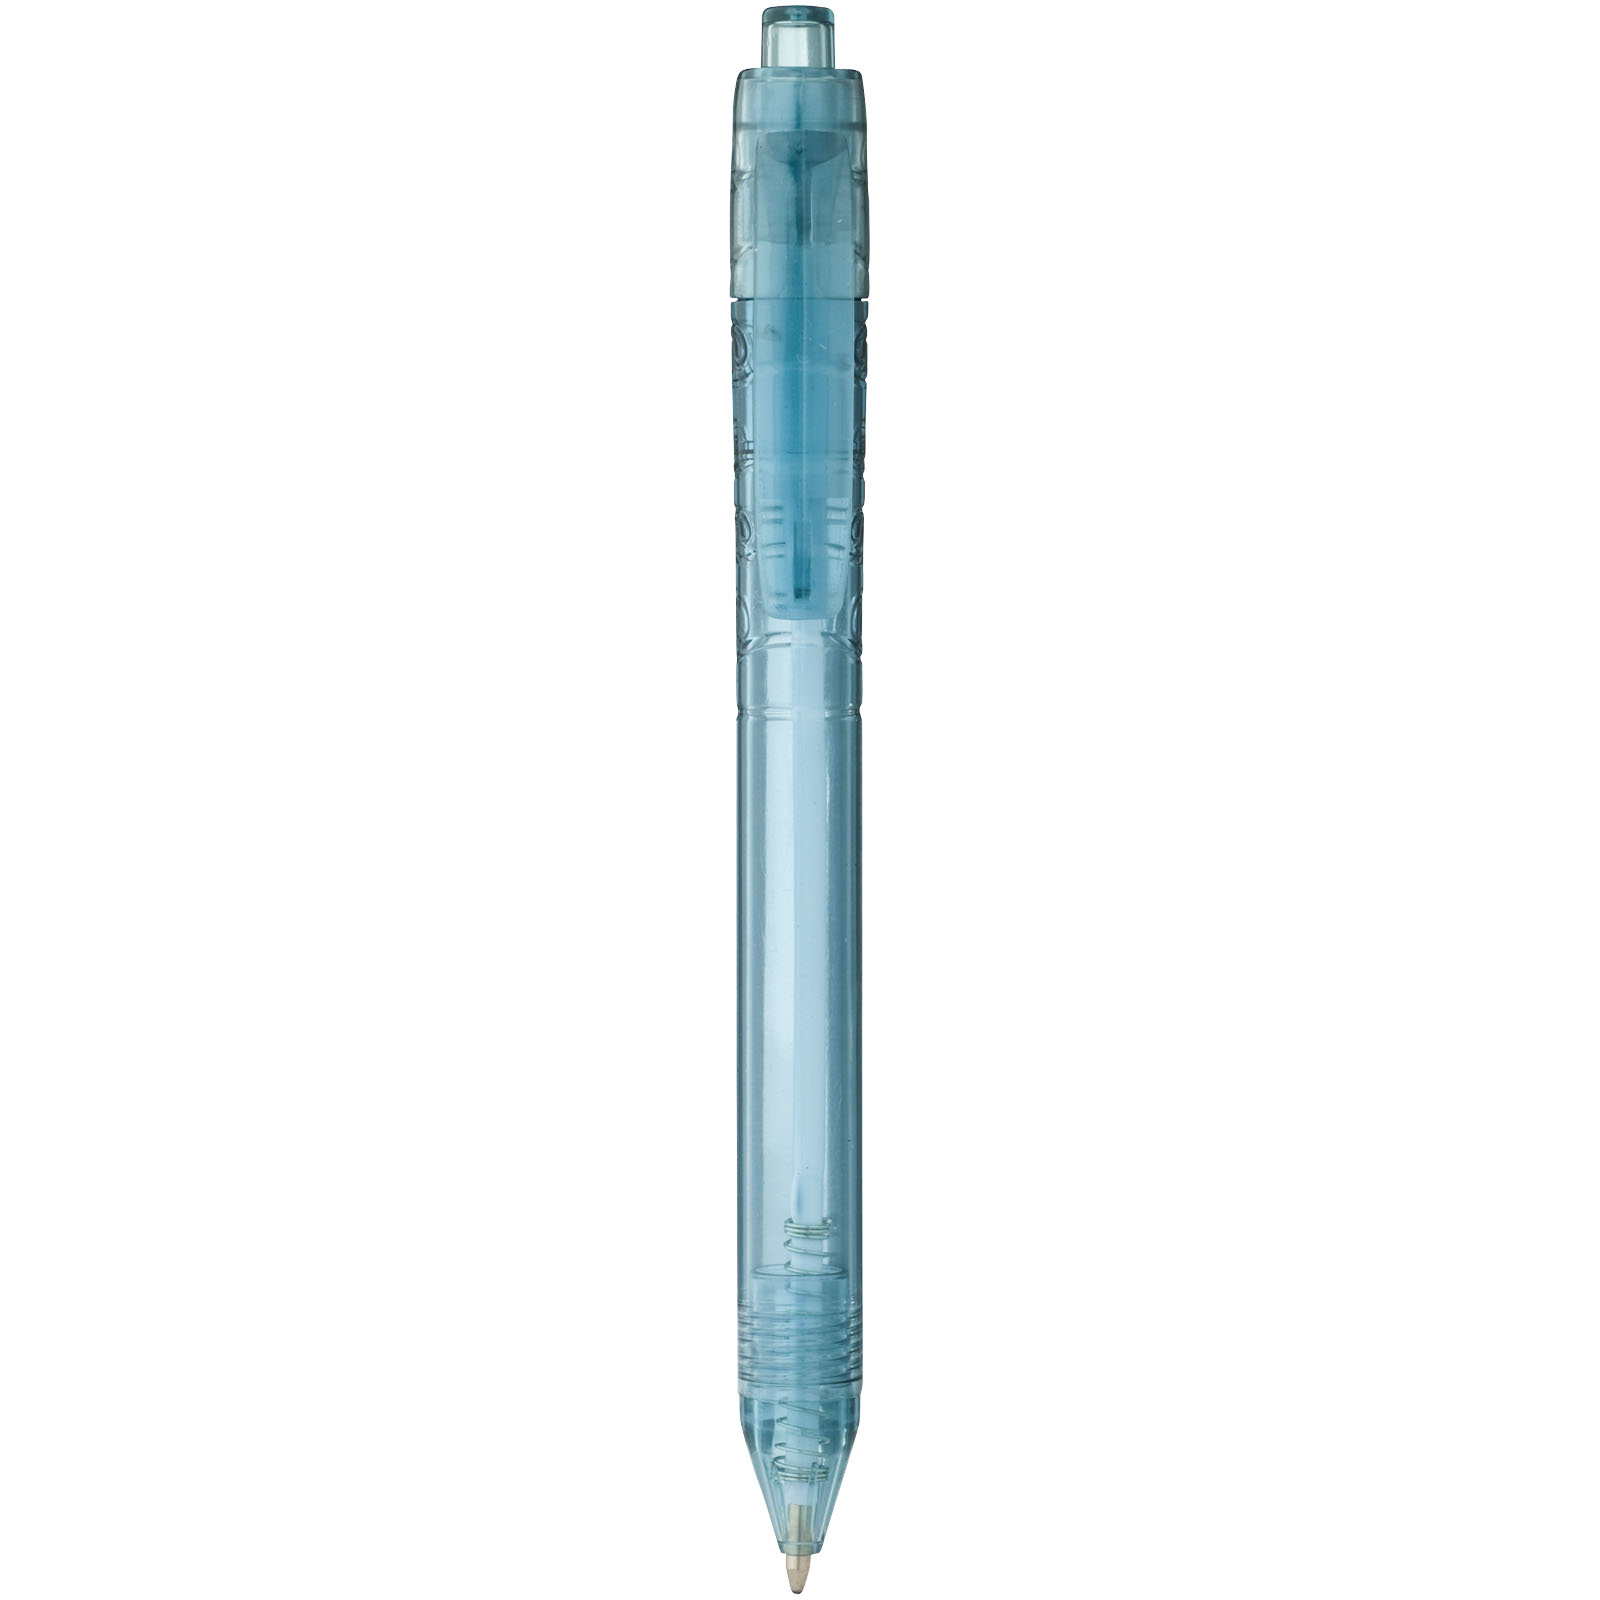 Pens & Writing - Vancouver recycled PET ballpoint pen